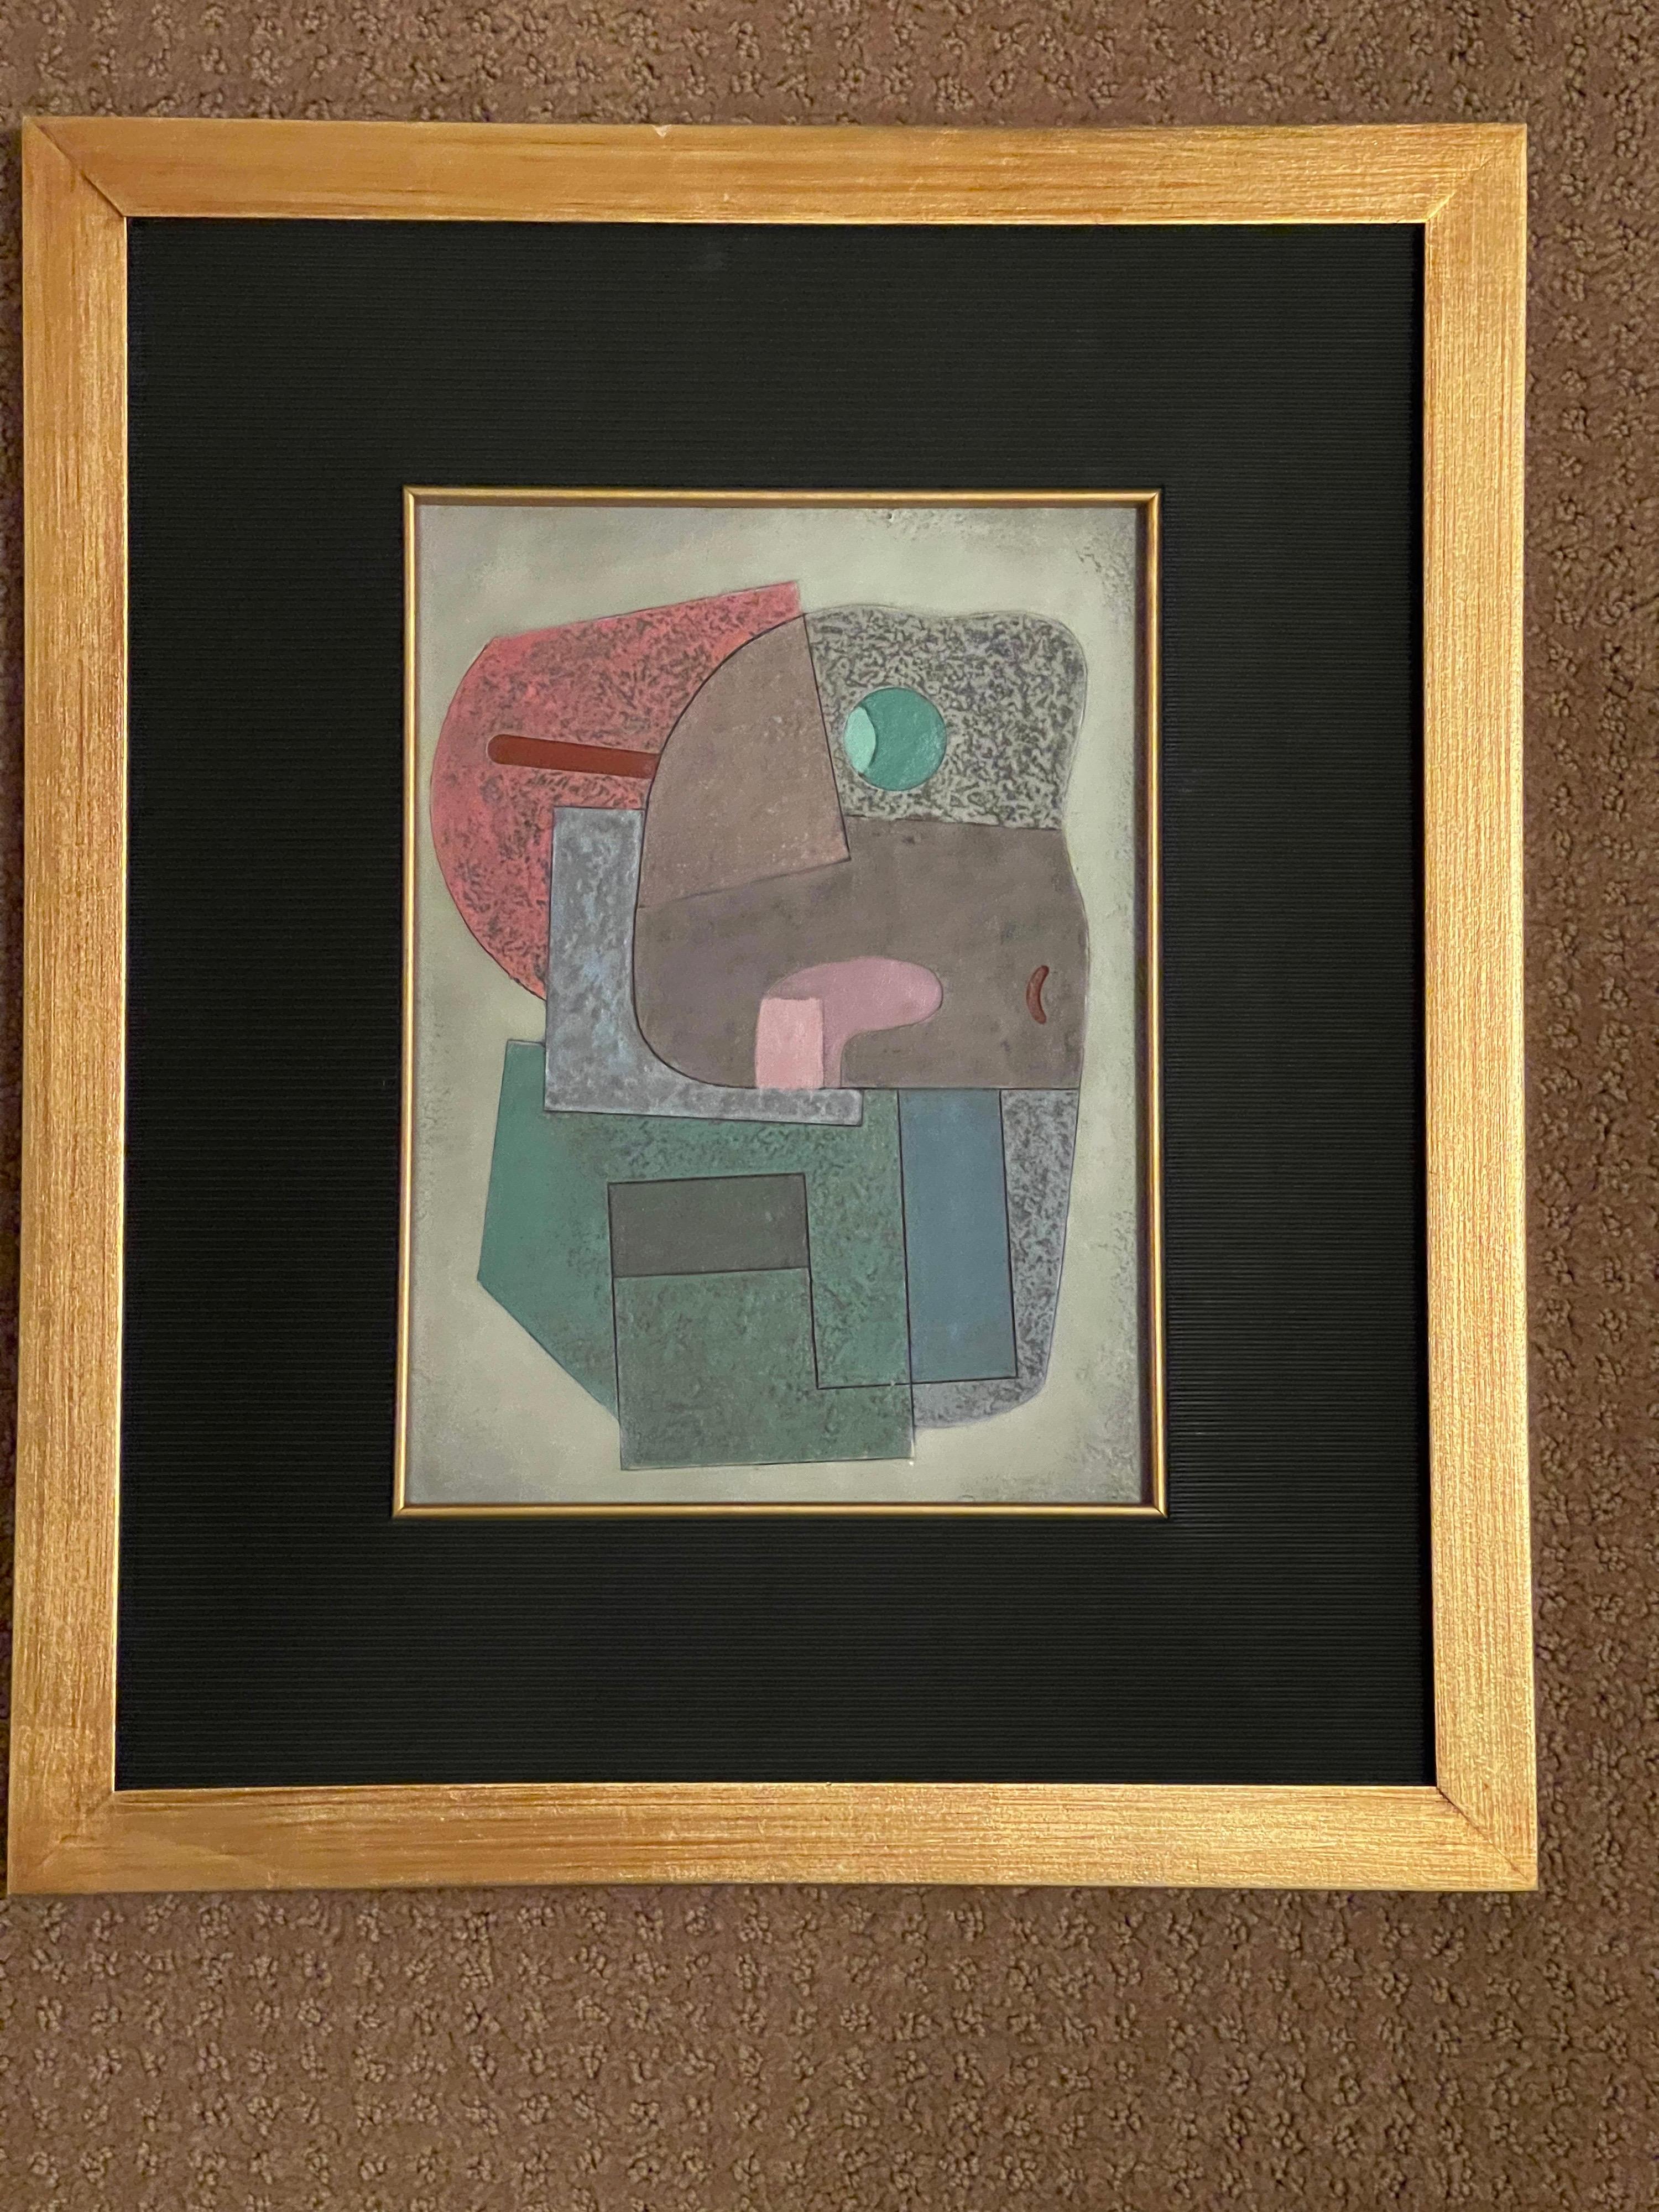 Post Modern Mixed Media Three Dimensional Abstract by Jose Luis Serrano In Good Condition For Sale In San Diego, CA